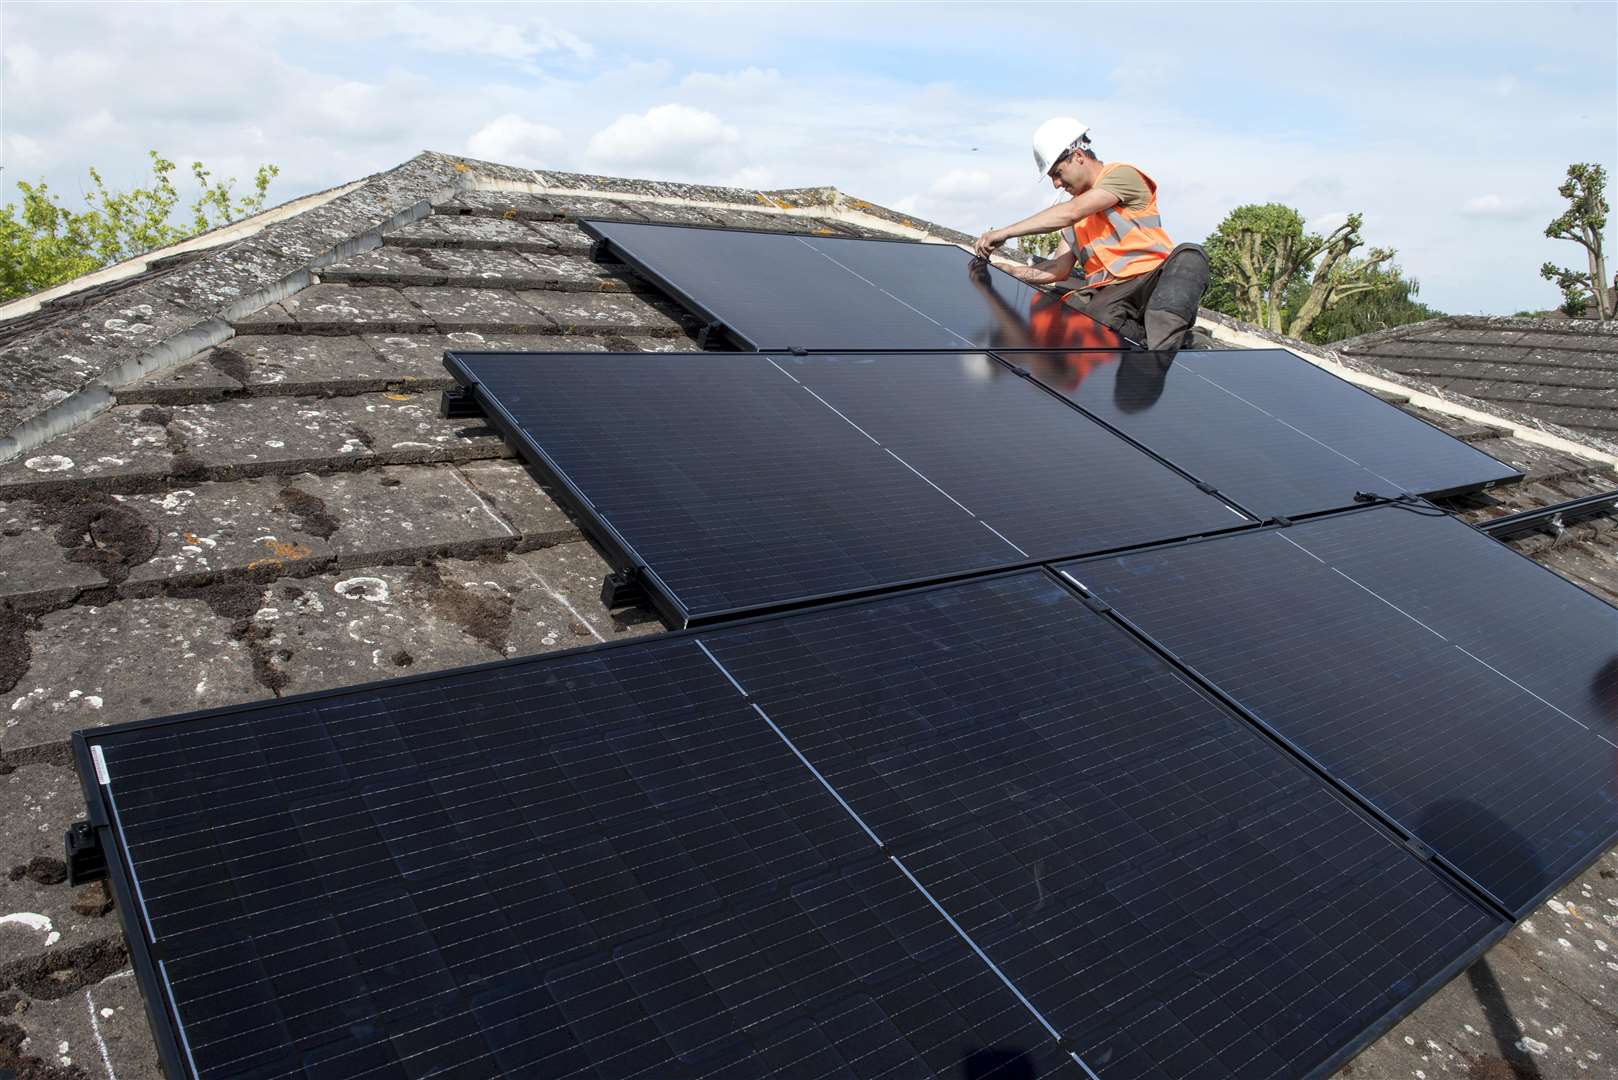 Firms are being urged to consider their carbon footprint with the installation of new energy sources - such as solar panels